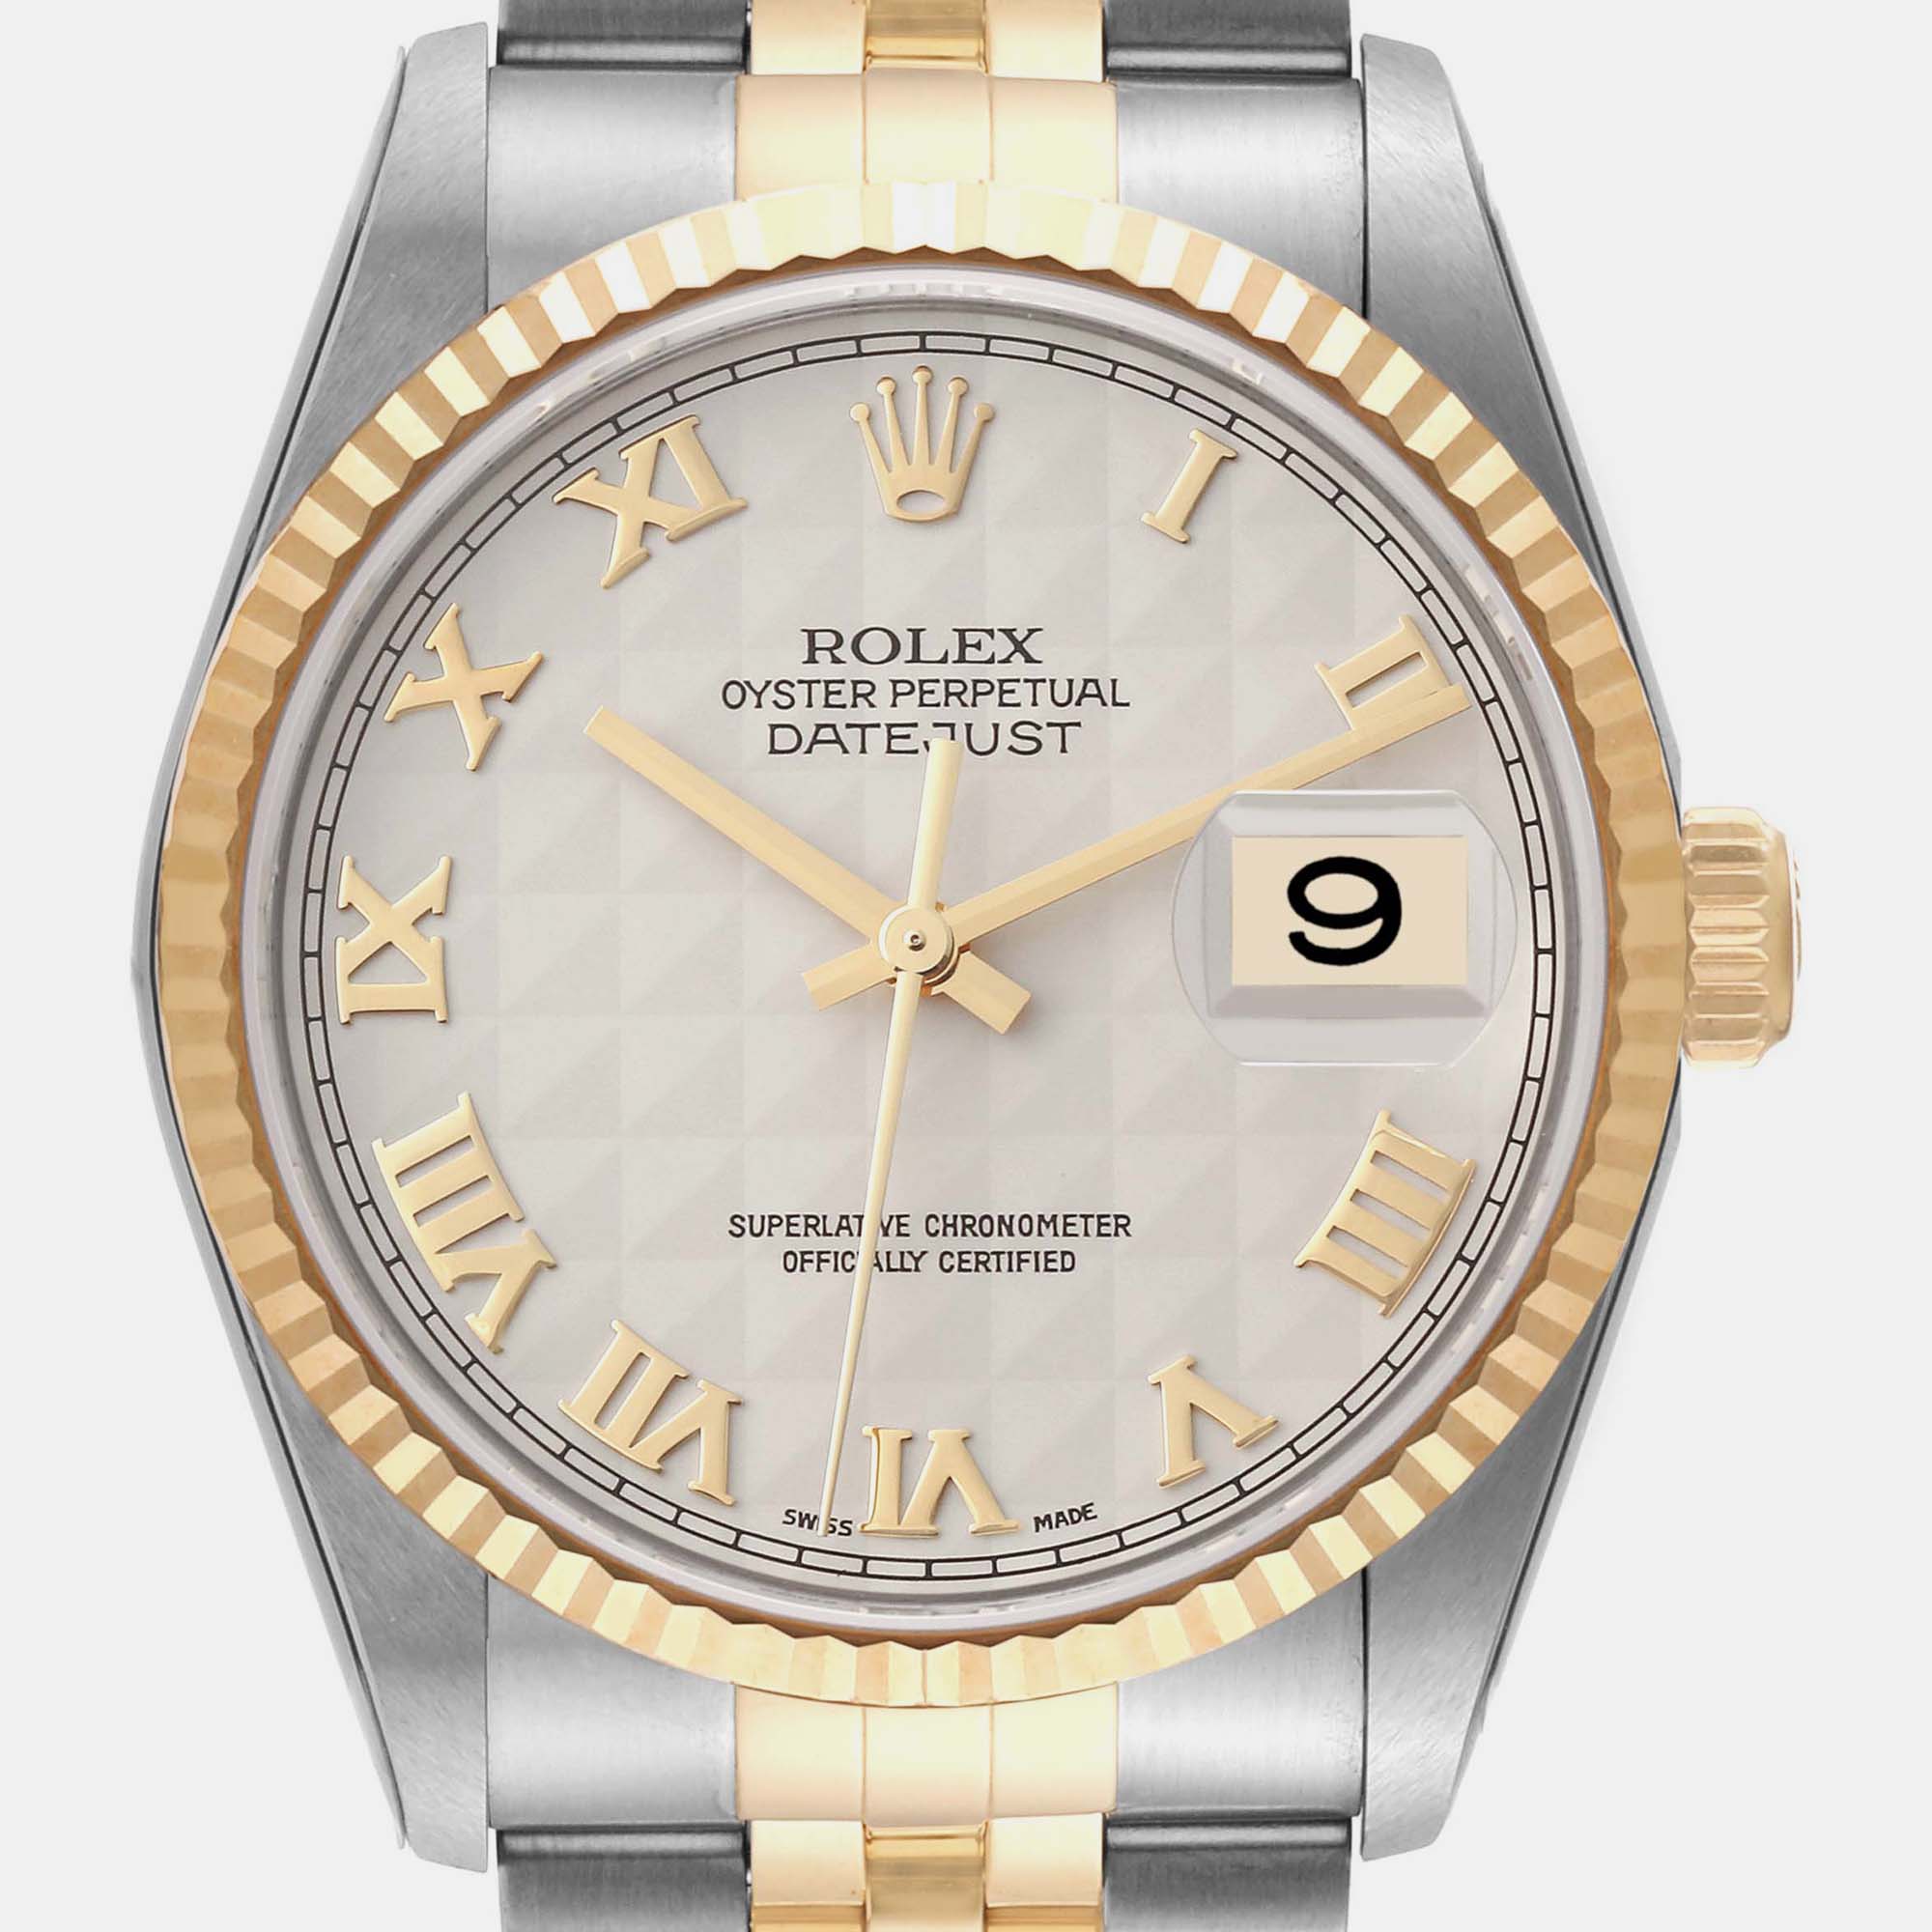 Rolex Datejust Steel Yellow Gold Ivory Pyramid Dial Men's Watch 16233 36 Mm